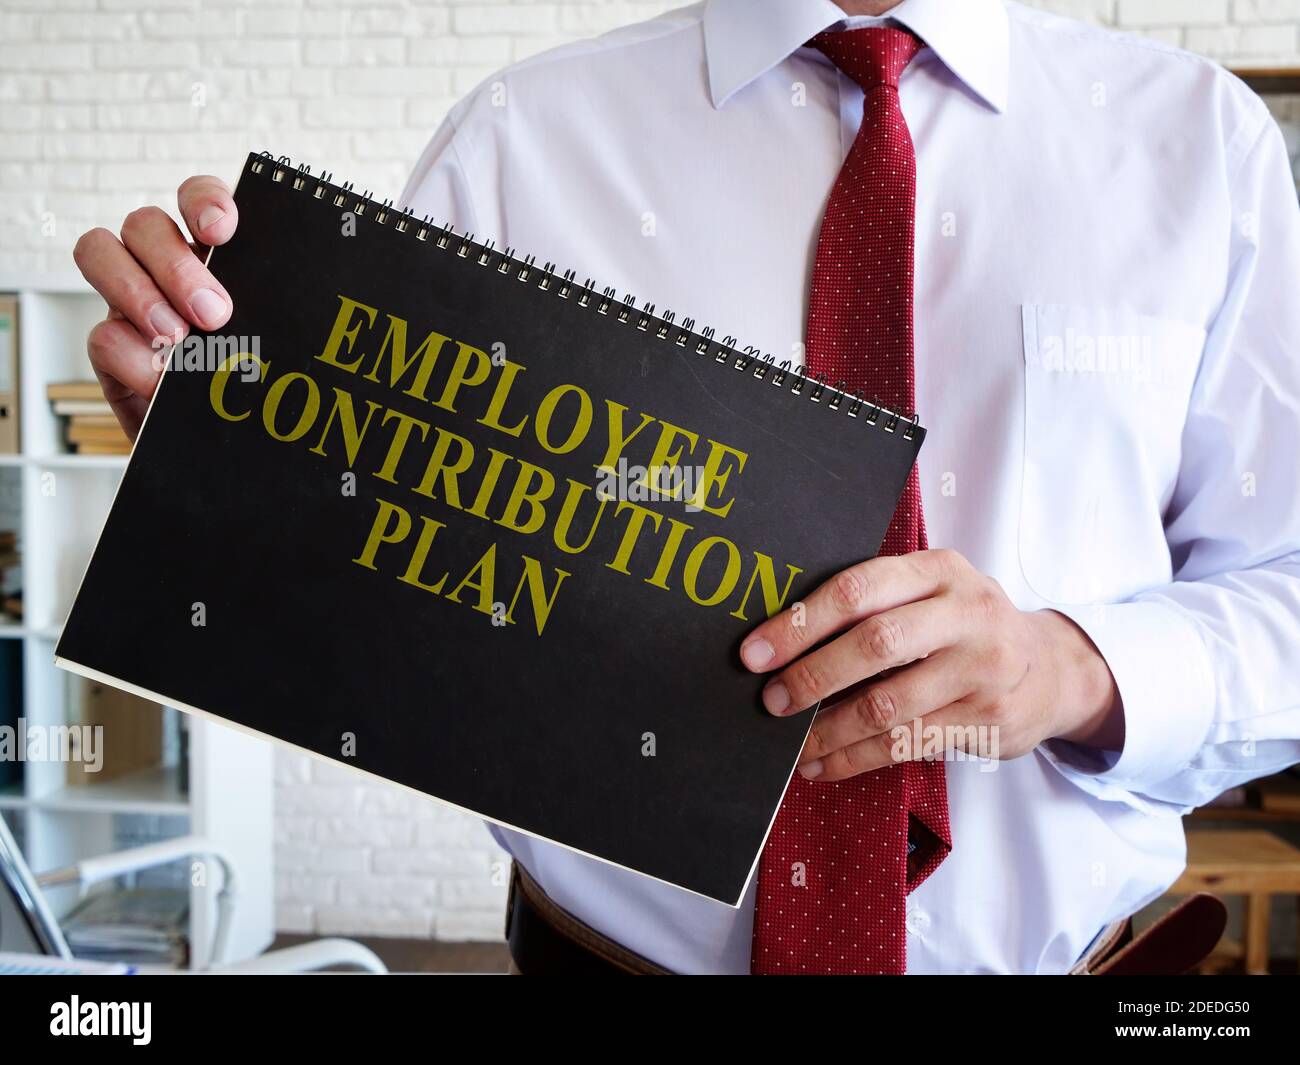 Manager proposes Employee Contribution Plan for reading. Stock Photo